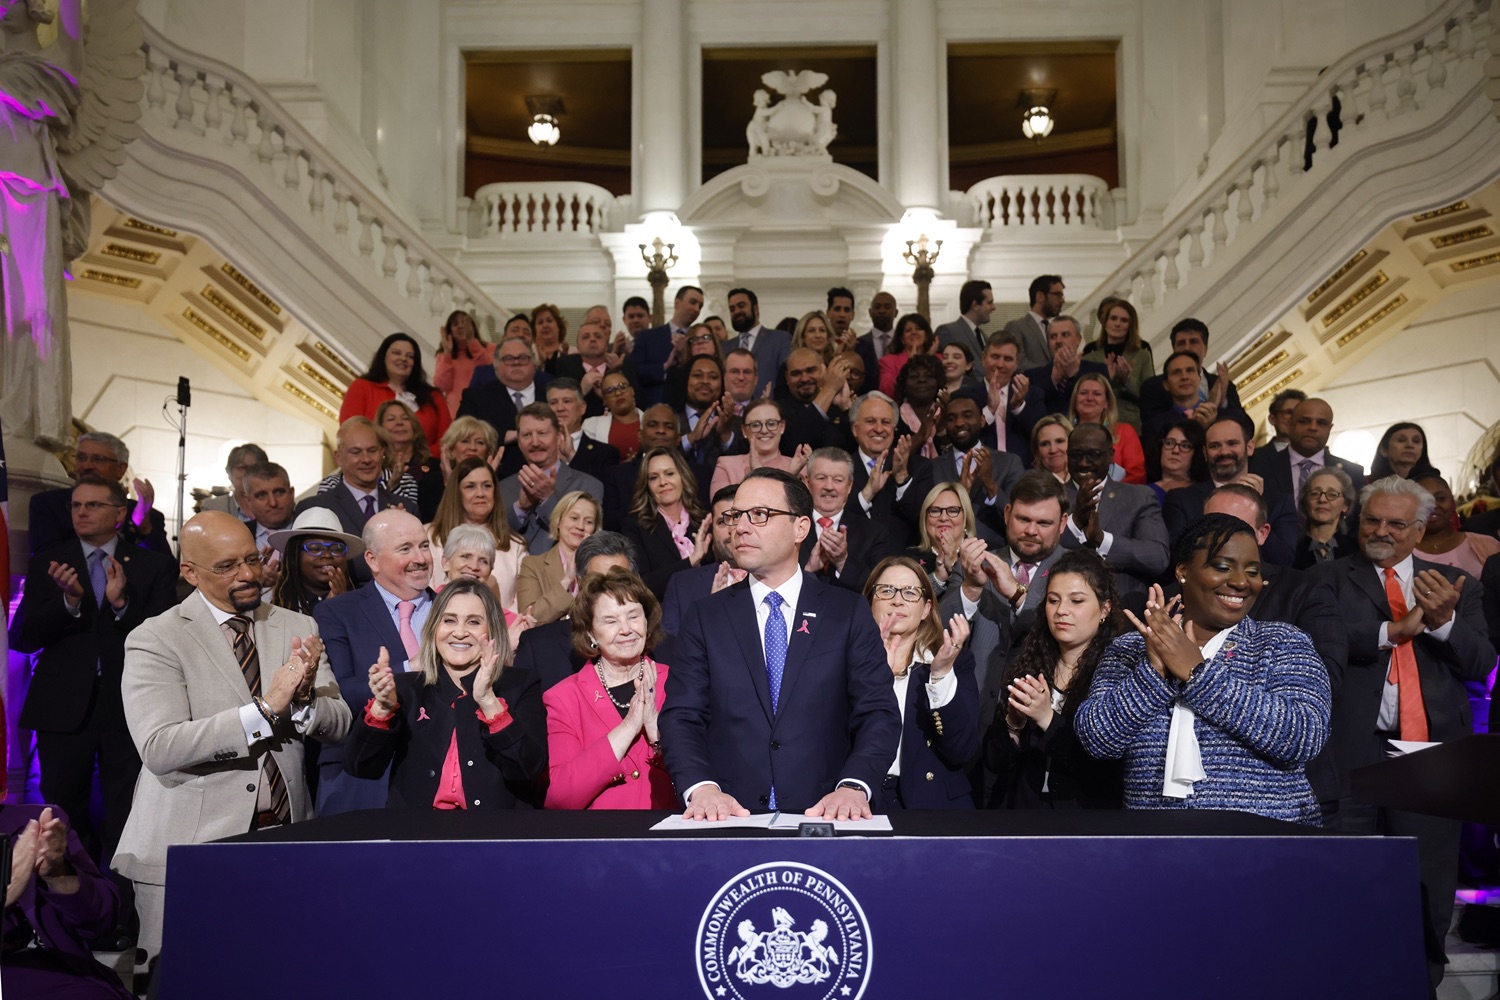 Governor Josh Shapiro signed the first bill of his Administration - Act 1 of 2023, a first-of-its-kind law in the nation that will require insurers to cover preventive breast and ovarian cancer screenings for high-risk women at no cost. MAY 01, 2023 - HARRISBURG, PA<br><a href="https://filesource.amperwave.net/commonwealthofpa/photo/23041_gov_sb8_dz_018.JPG" target="_blank">⇣ Download Photo</a>